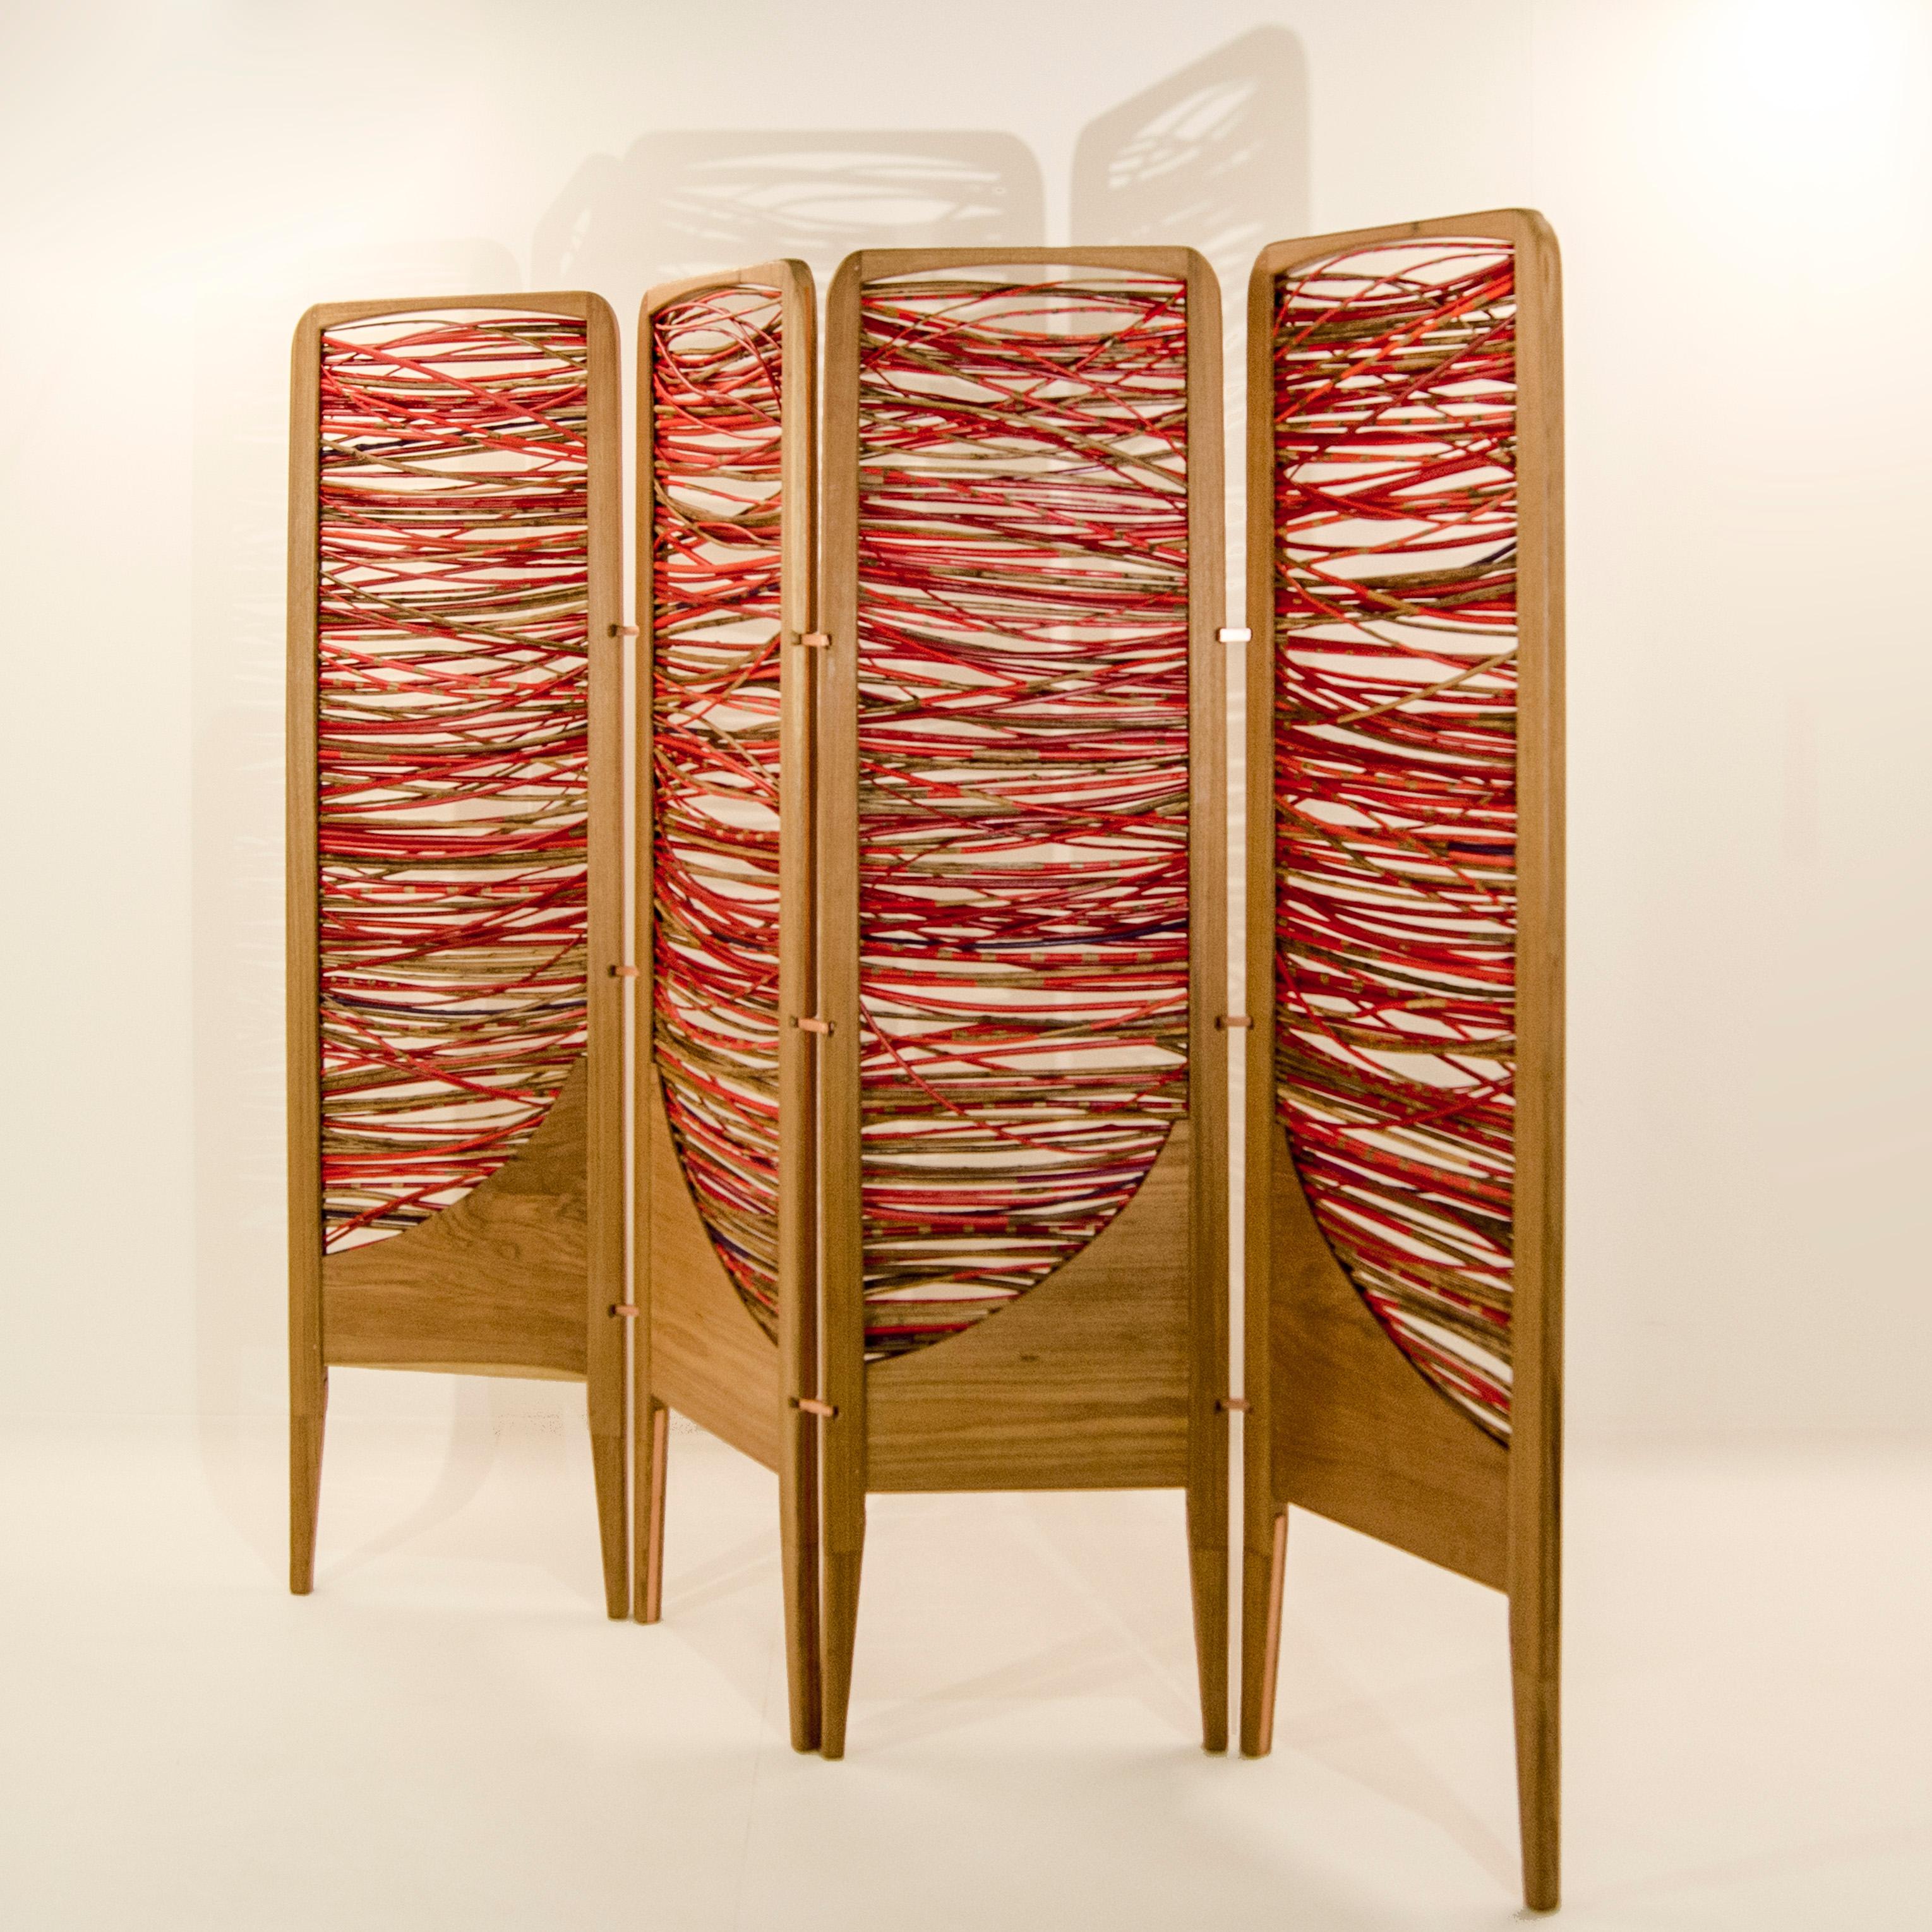 Guá is a contemporary version of a traditional screen, the result of a collaboration between Knót Artesanal and Mexican artist Patricia Sada. The straight lines and natural wood tone of the frame contrast with the vibrant color and organic form of